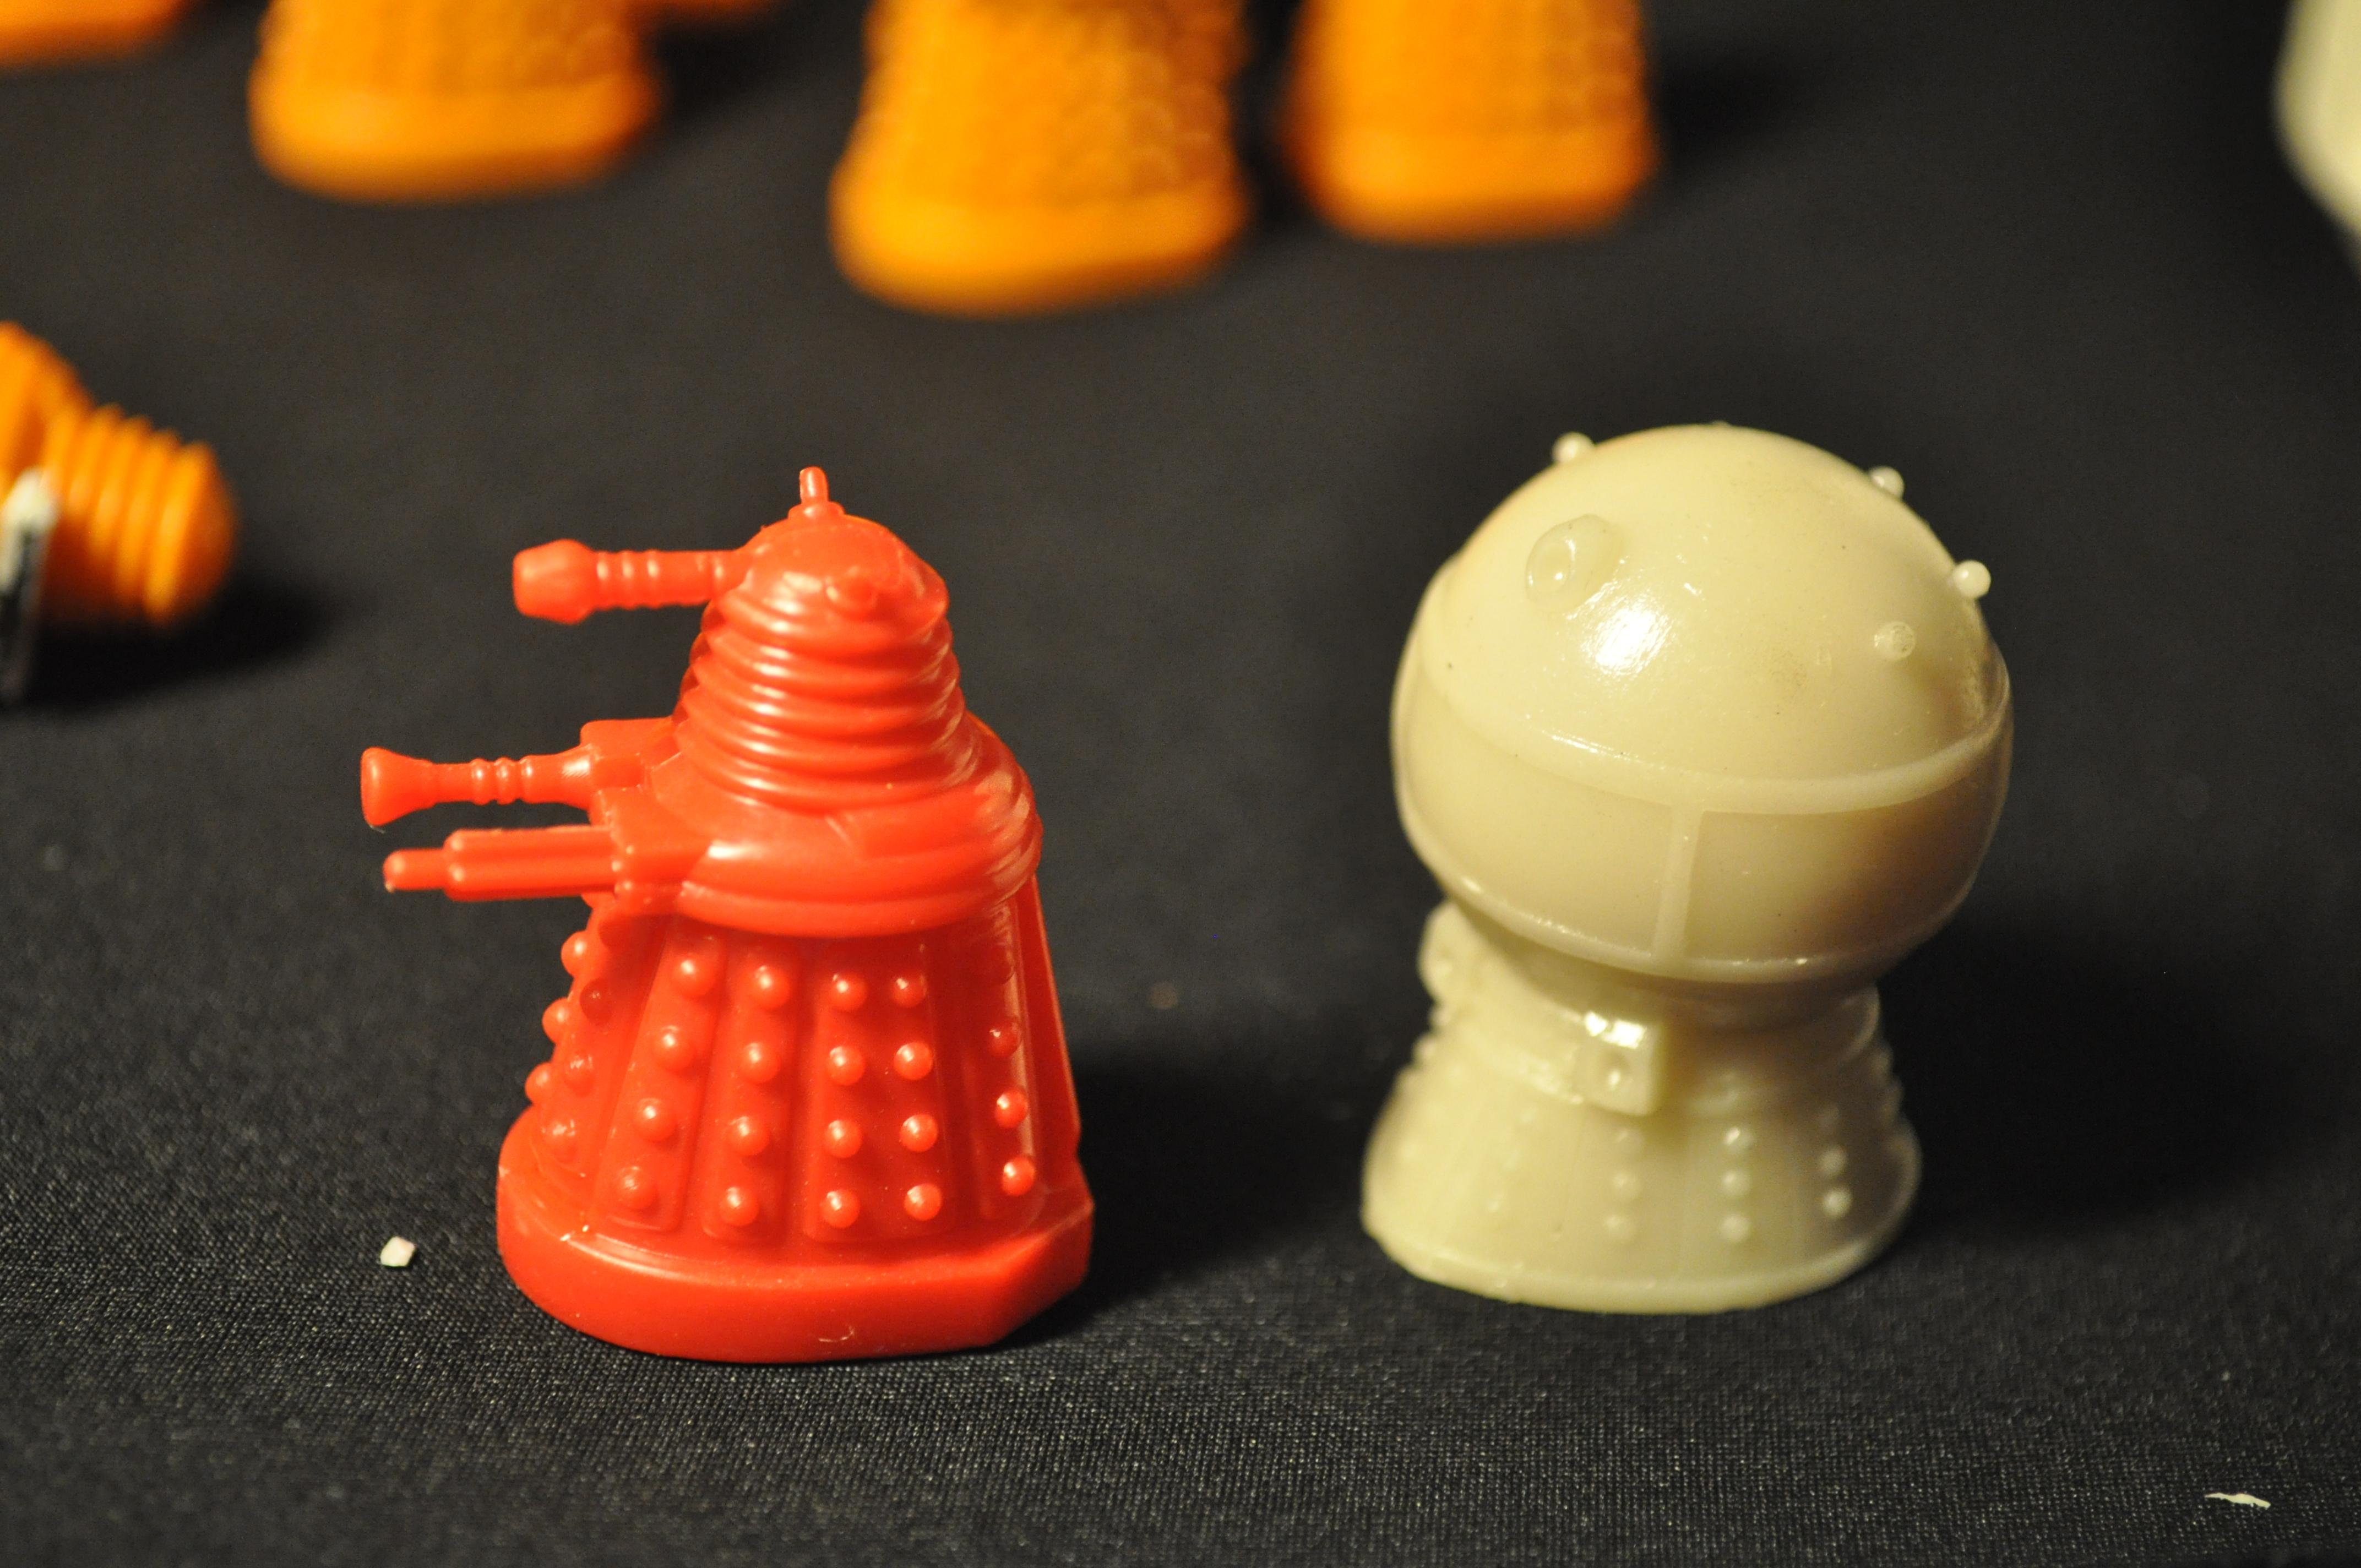 Dalek, Doctor Who, Dr. Who